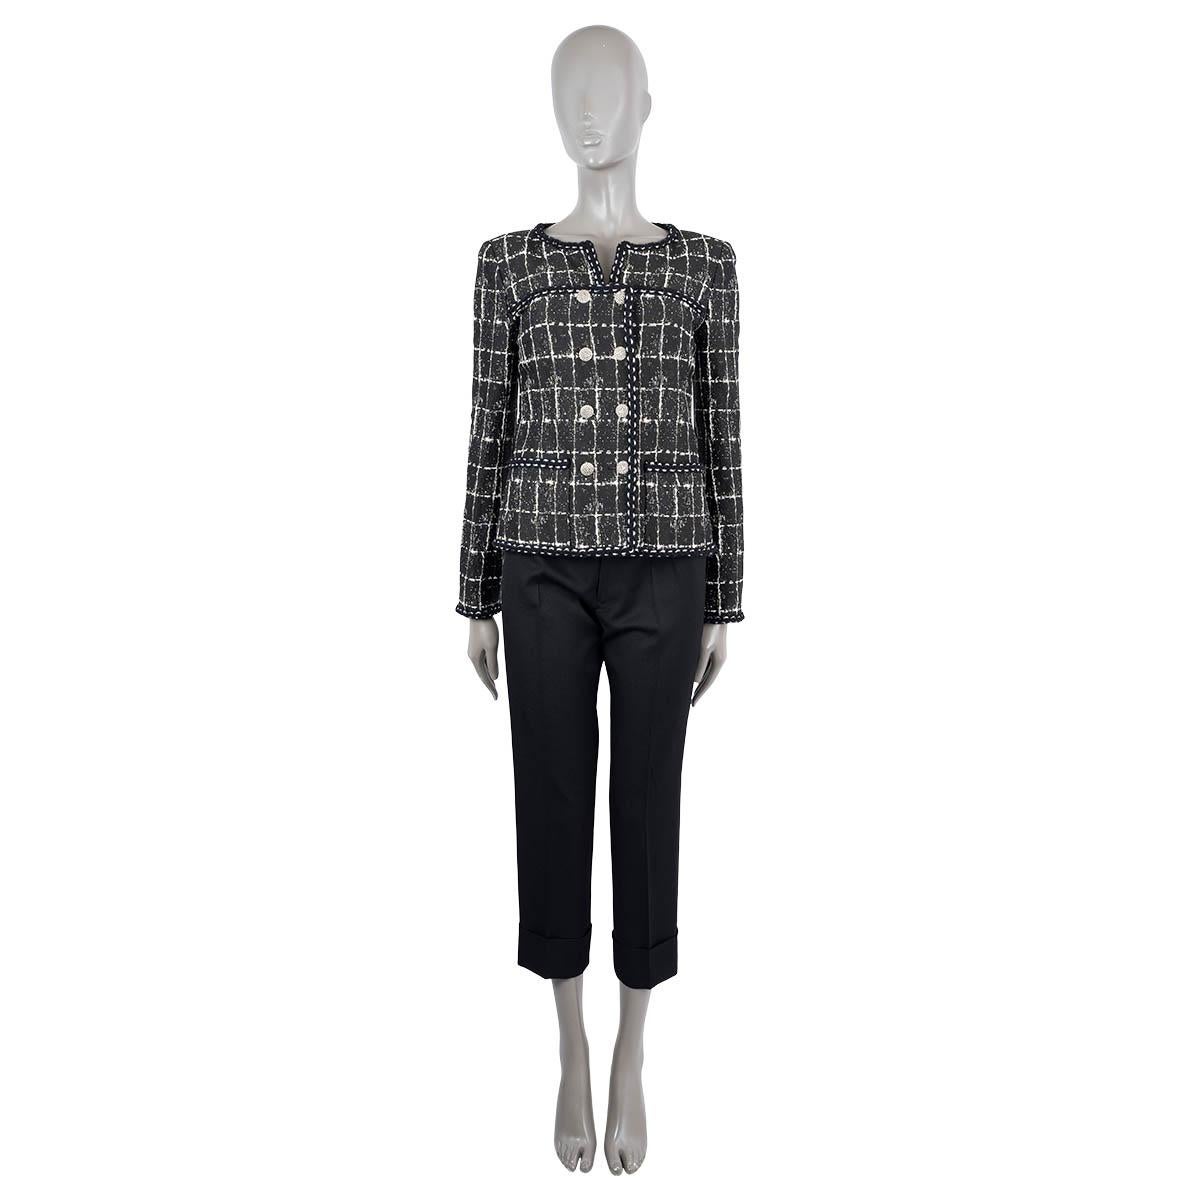 100% authentic Chanel collarless double-breasted tweed jacket in black polyamide (34%), silk (20%), polyurethane (18%), polyester (15%) and cotton (13%). Features woven metal and CC buttons, two front pockets and braided trims. Lined in silk (100%).